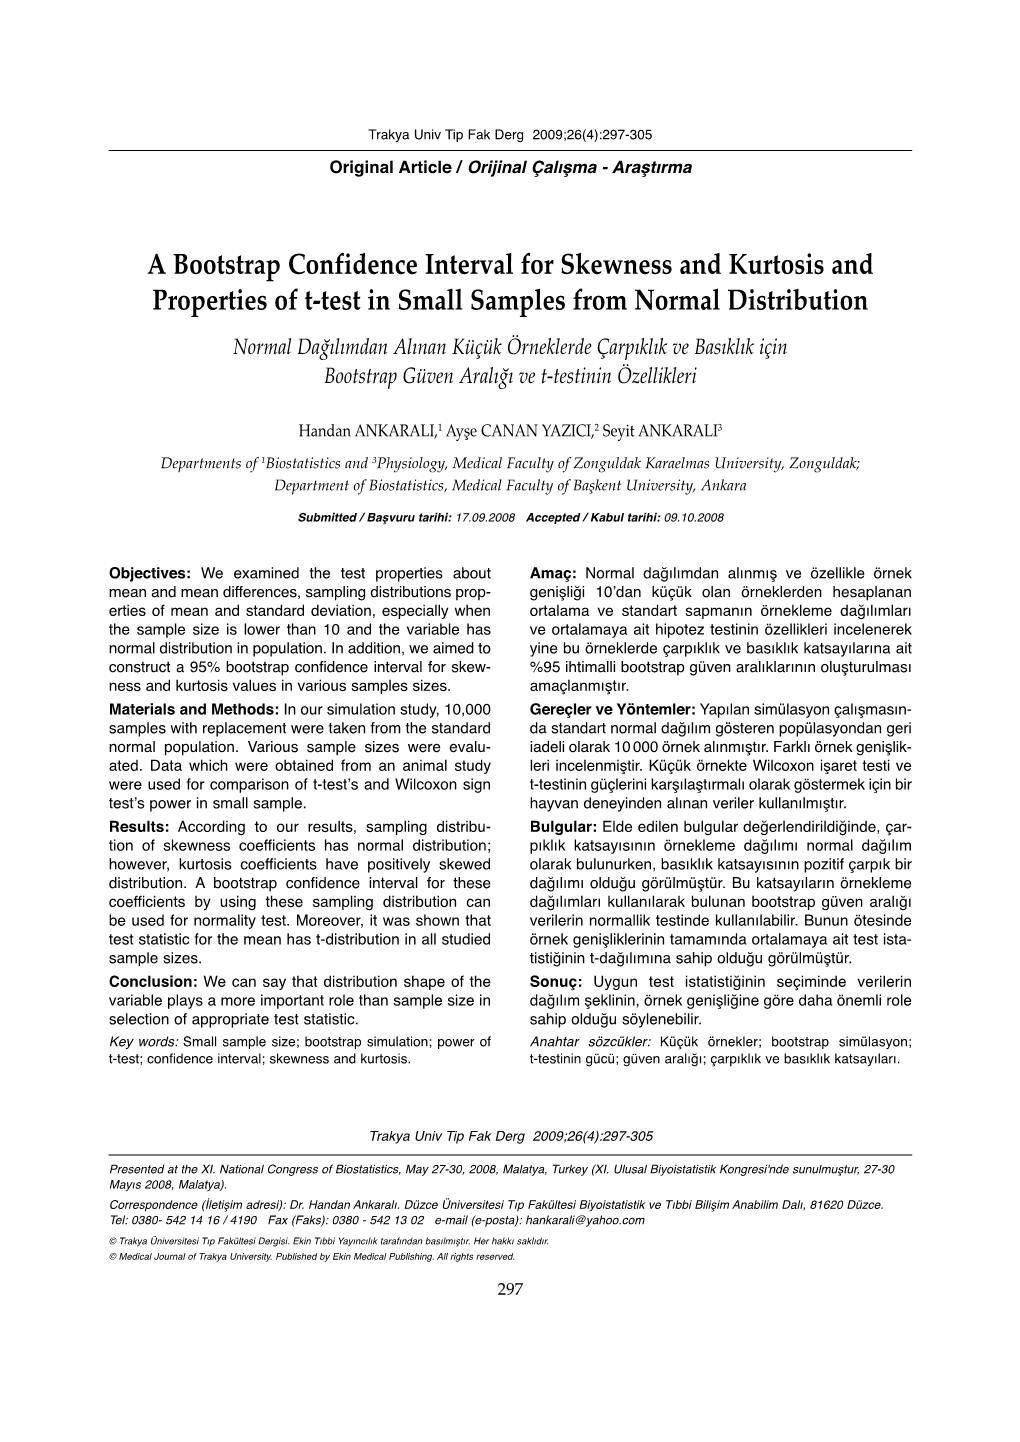 A Bootstrap Confidence Interval for Skewness and Kurtosis And